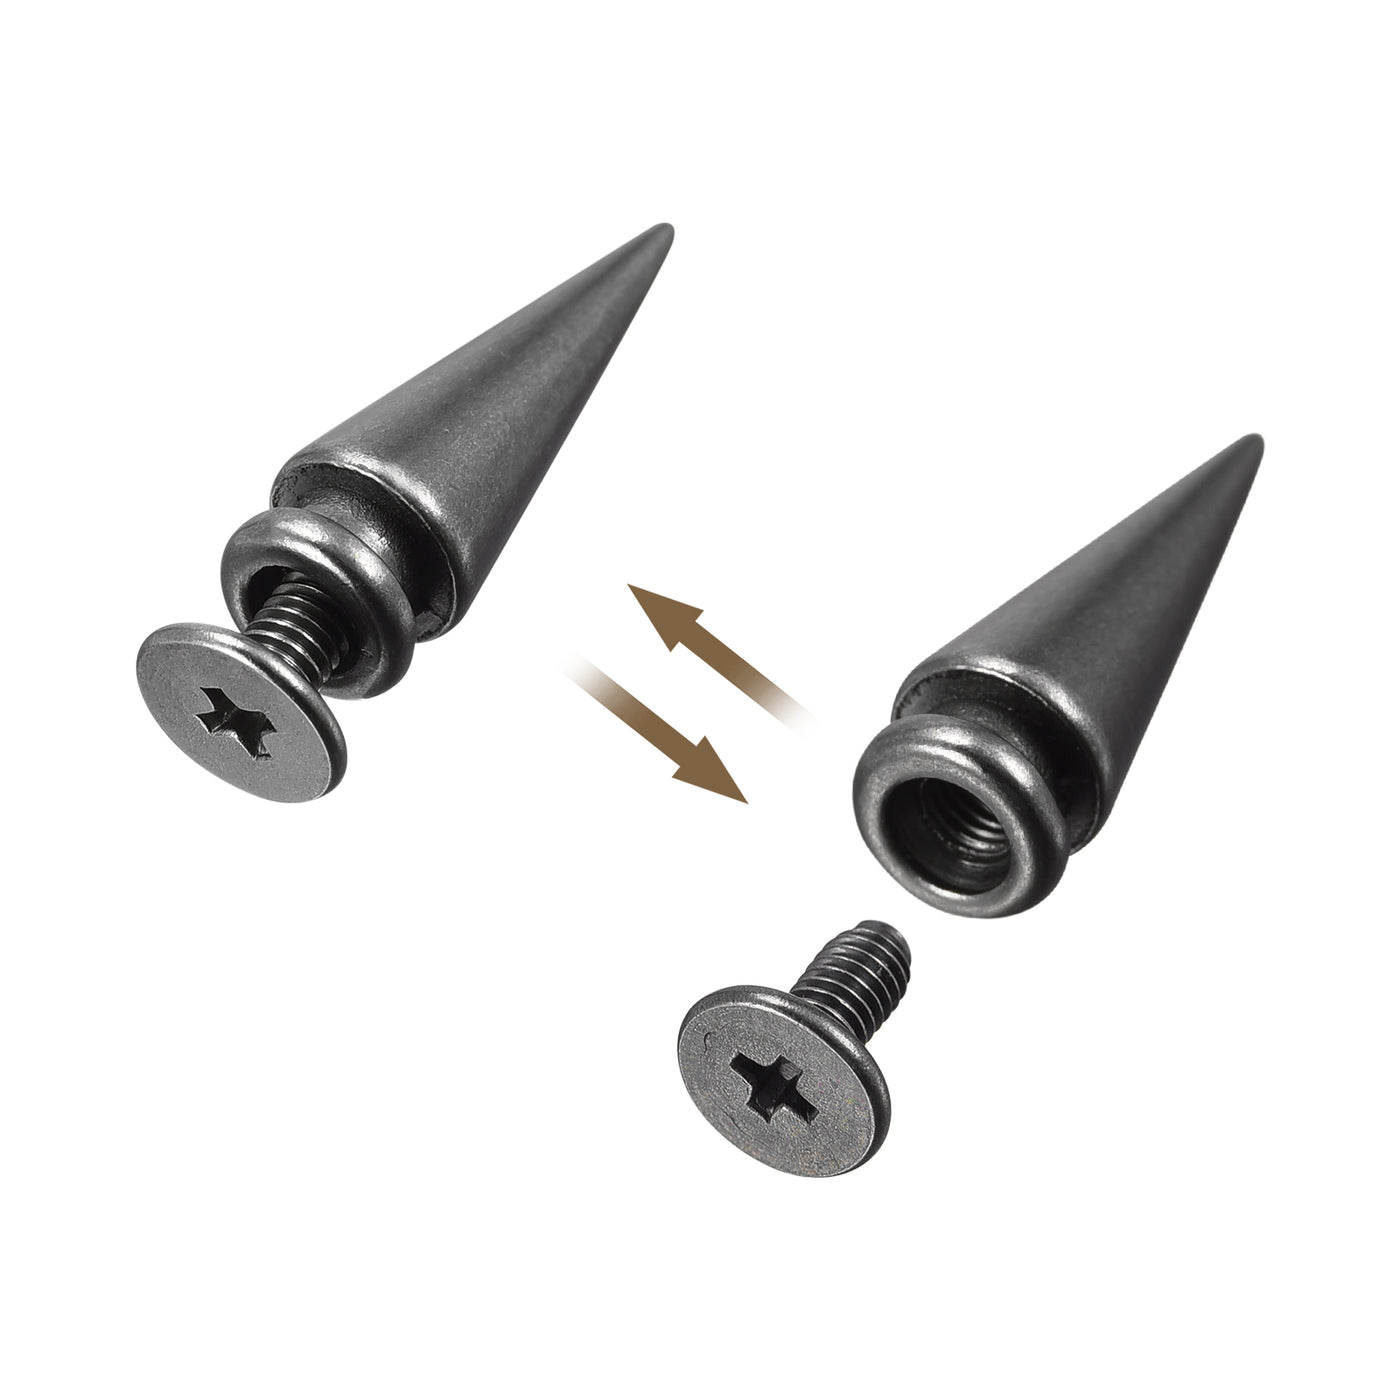 Uxcell Uxcell 7x20mm Screw Back Stud Rivets Spikes Zinc Alloy for DIY Dark Gray 20 Sets